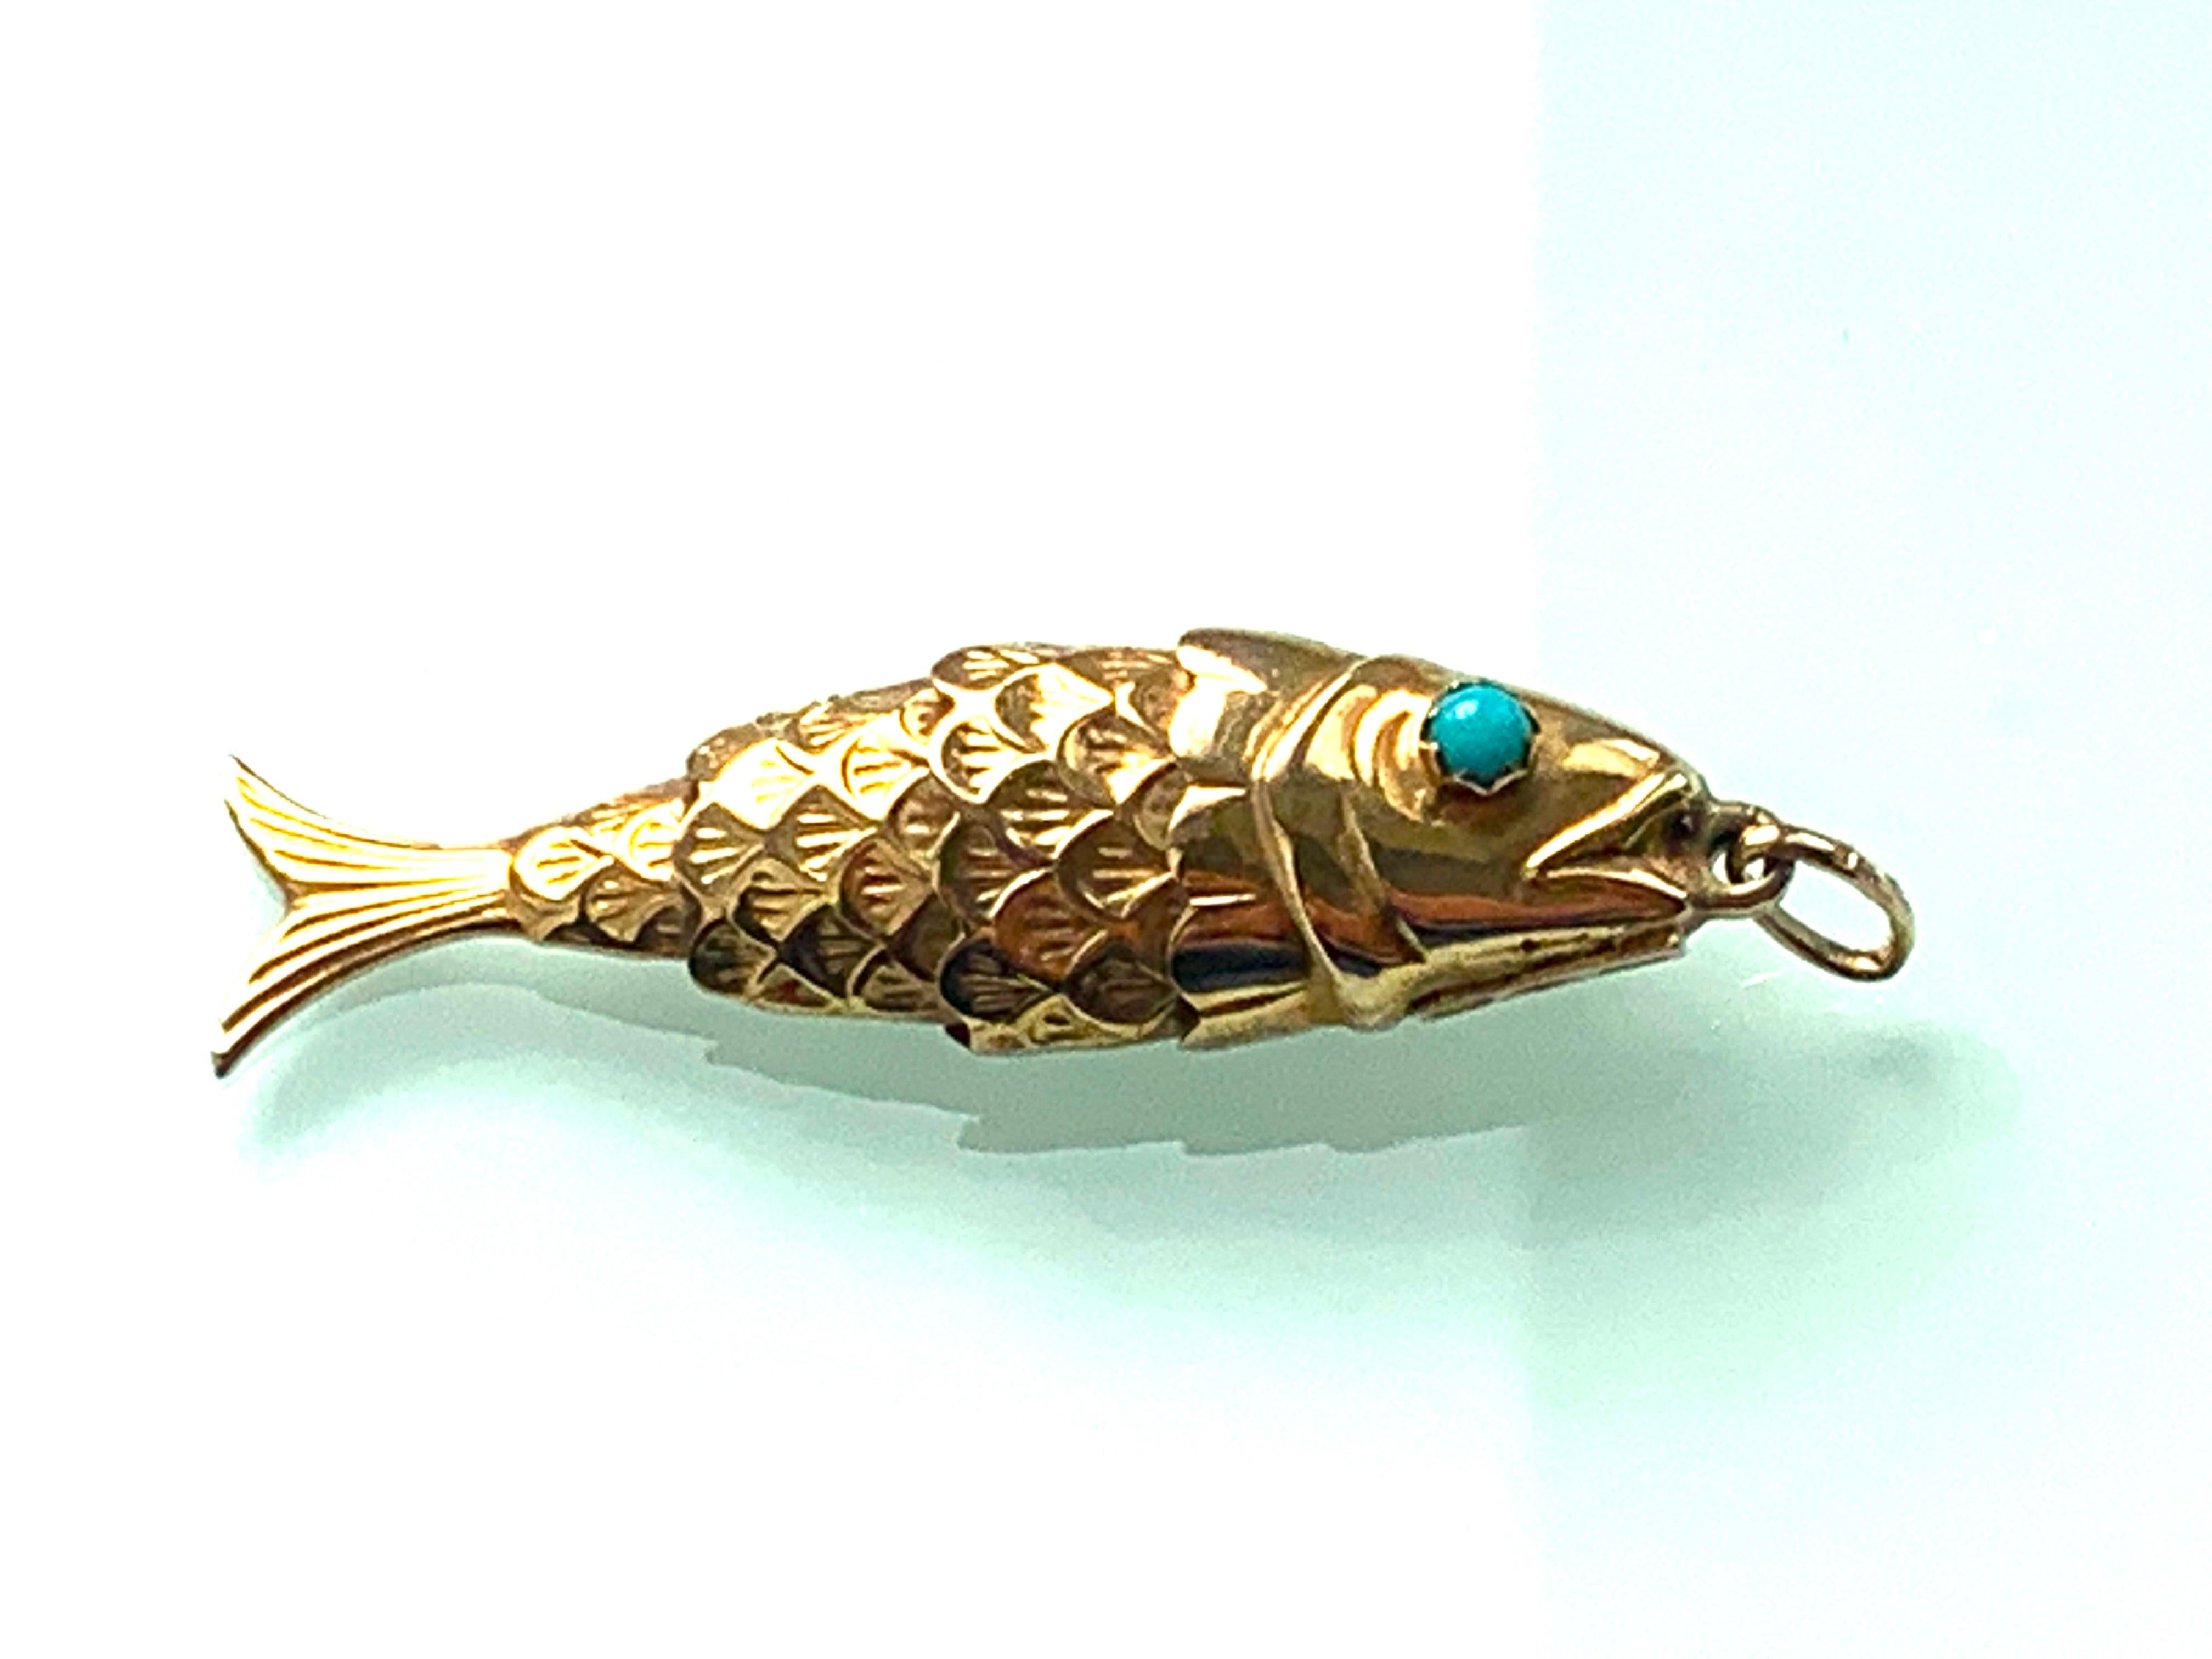 9ct 375 Gold Articulated Fish 
with a Natural turquoise stone eyes - both secure 
By Italian Goldsmith Unoaerre 
Era 1970s
Full Italian Stamps underneath and 375 1 AR & Unoaerre
and British hallmarks on the jump ring 
Size 45mm x 7mm x 3.5mm ( Incl.